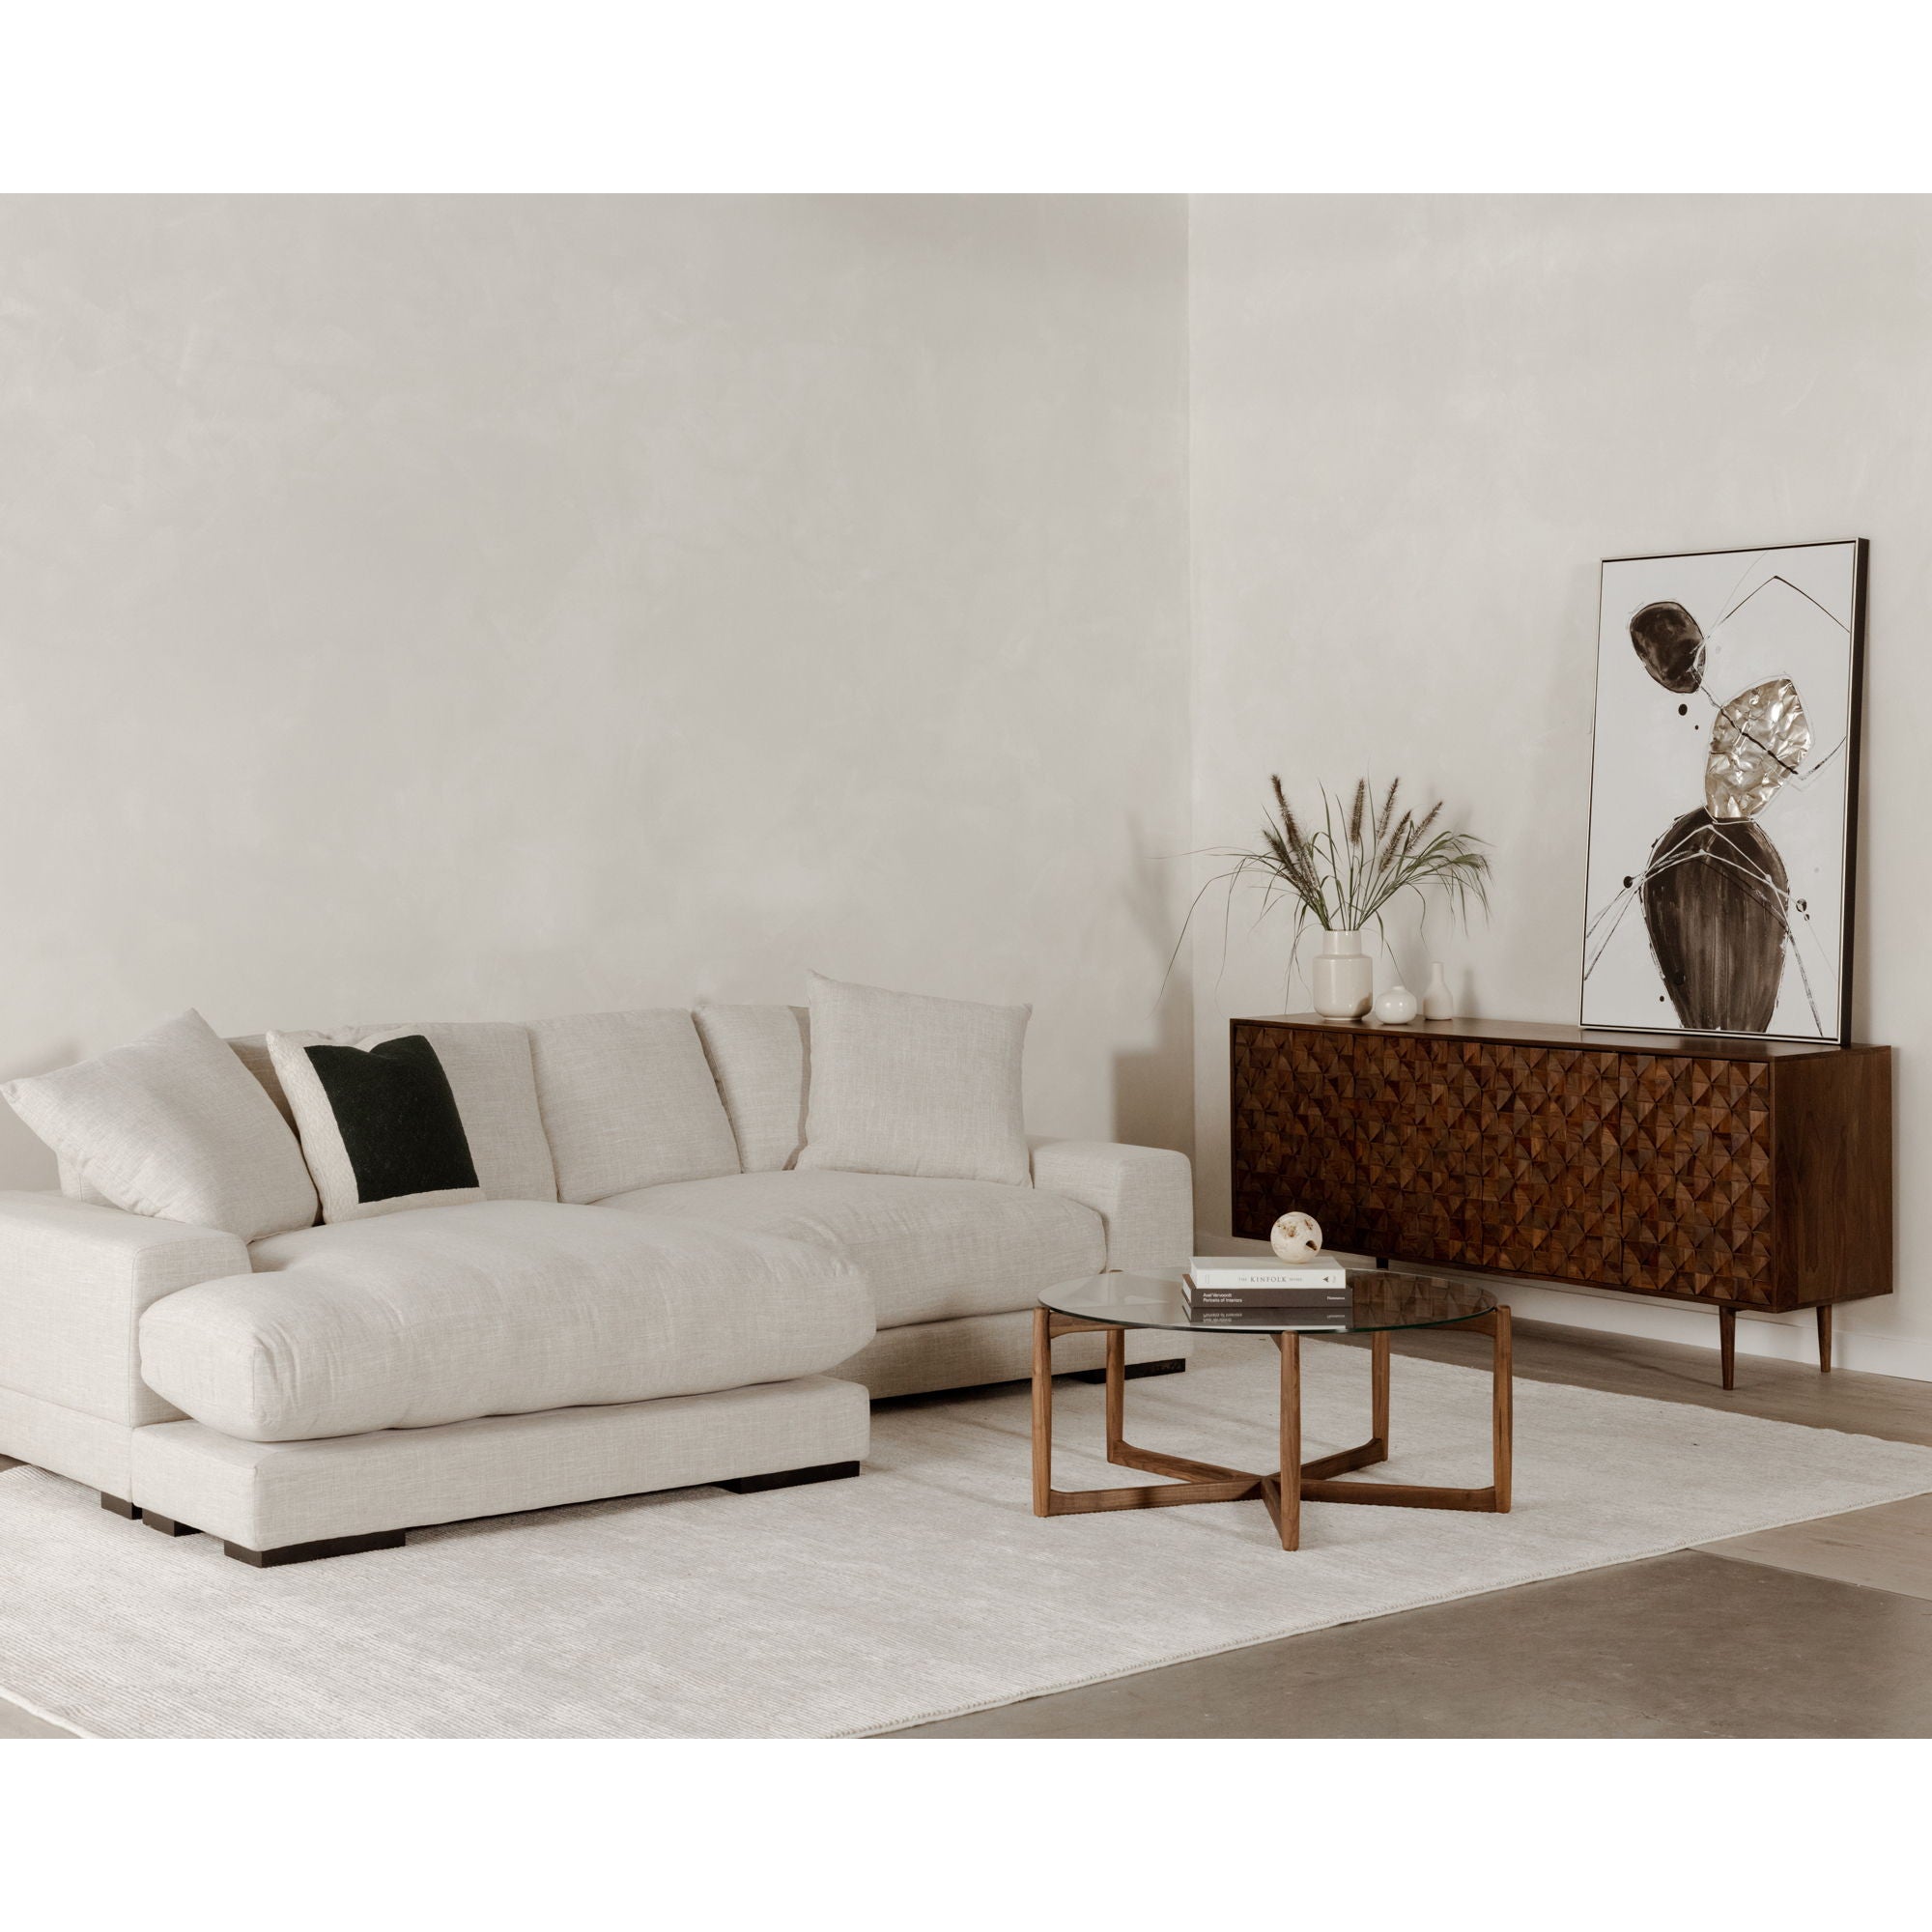 Plunge Beige Sectional - Modern & Modular-Stationary Sectionals-American Furniture Outlet